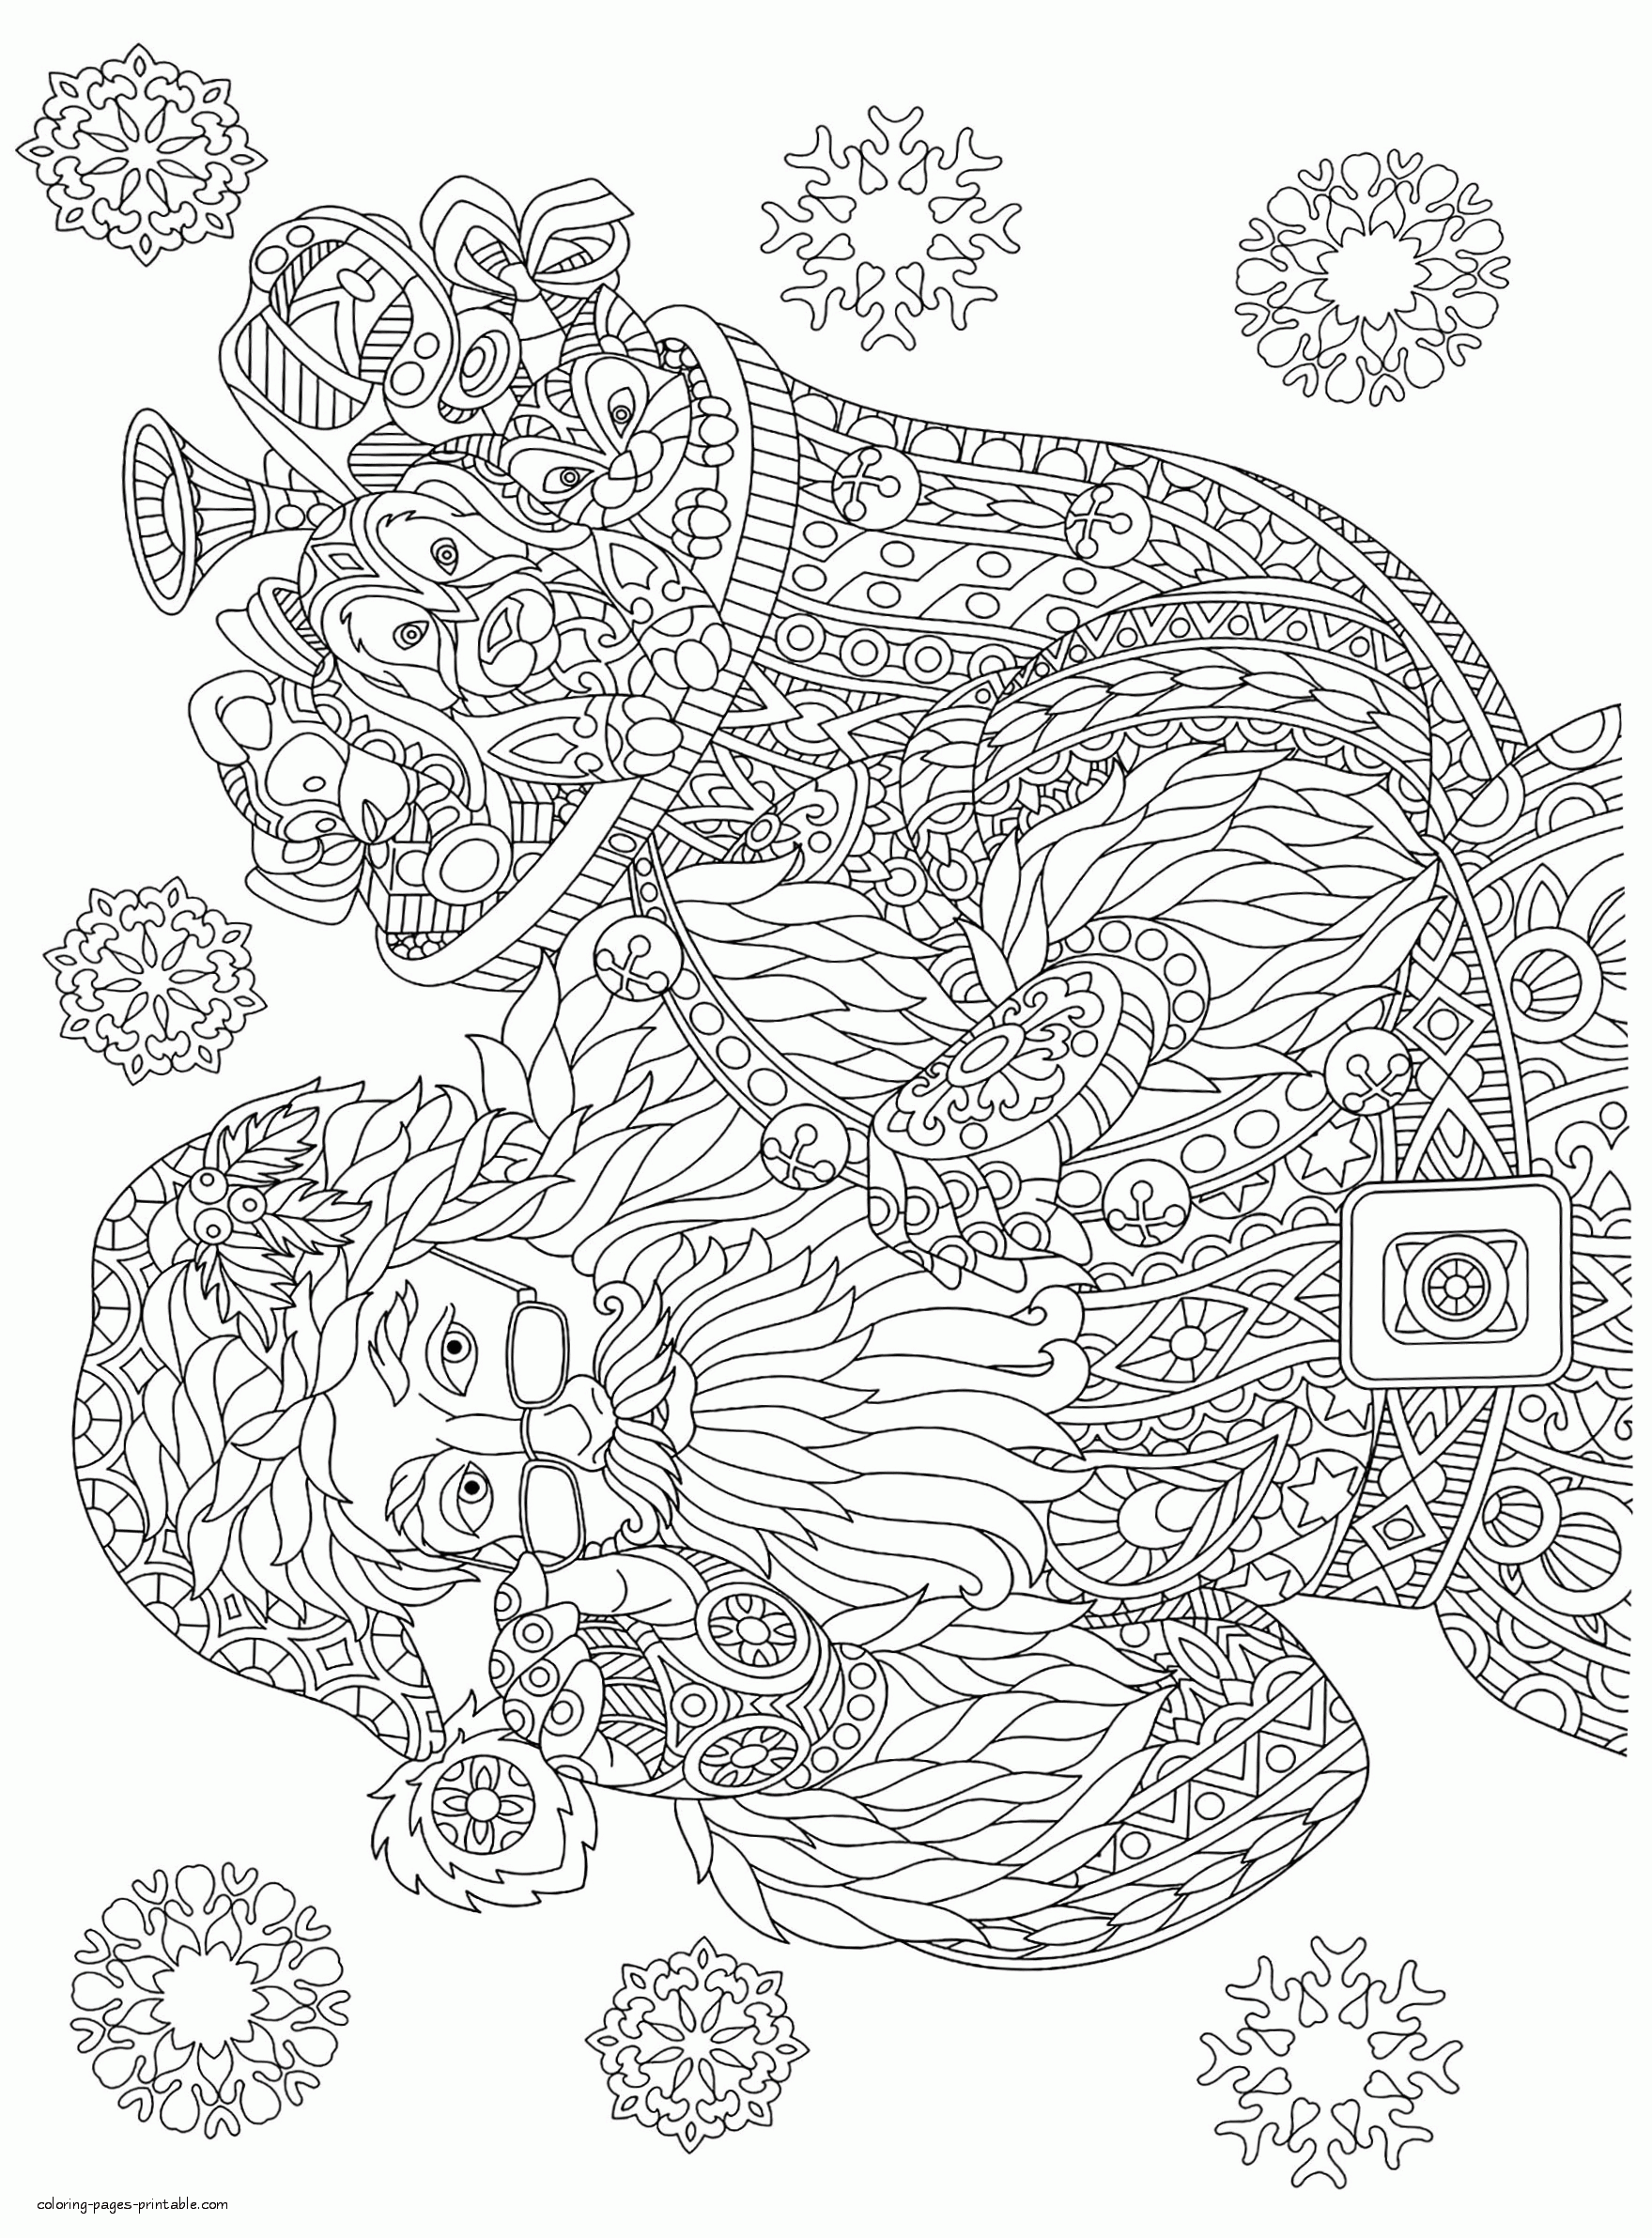 Santa Christmas Coloring Pages For Adults. Printable picture